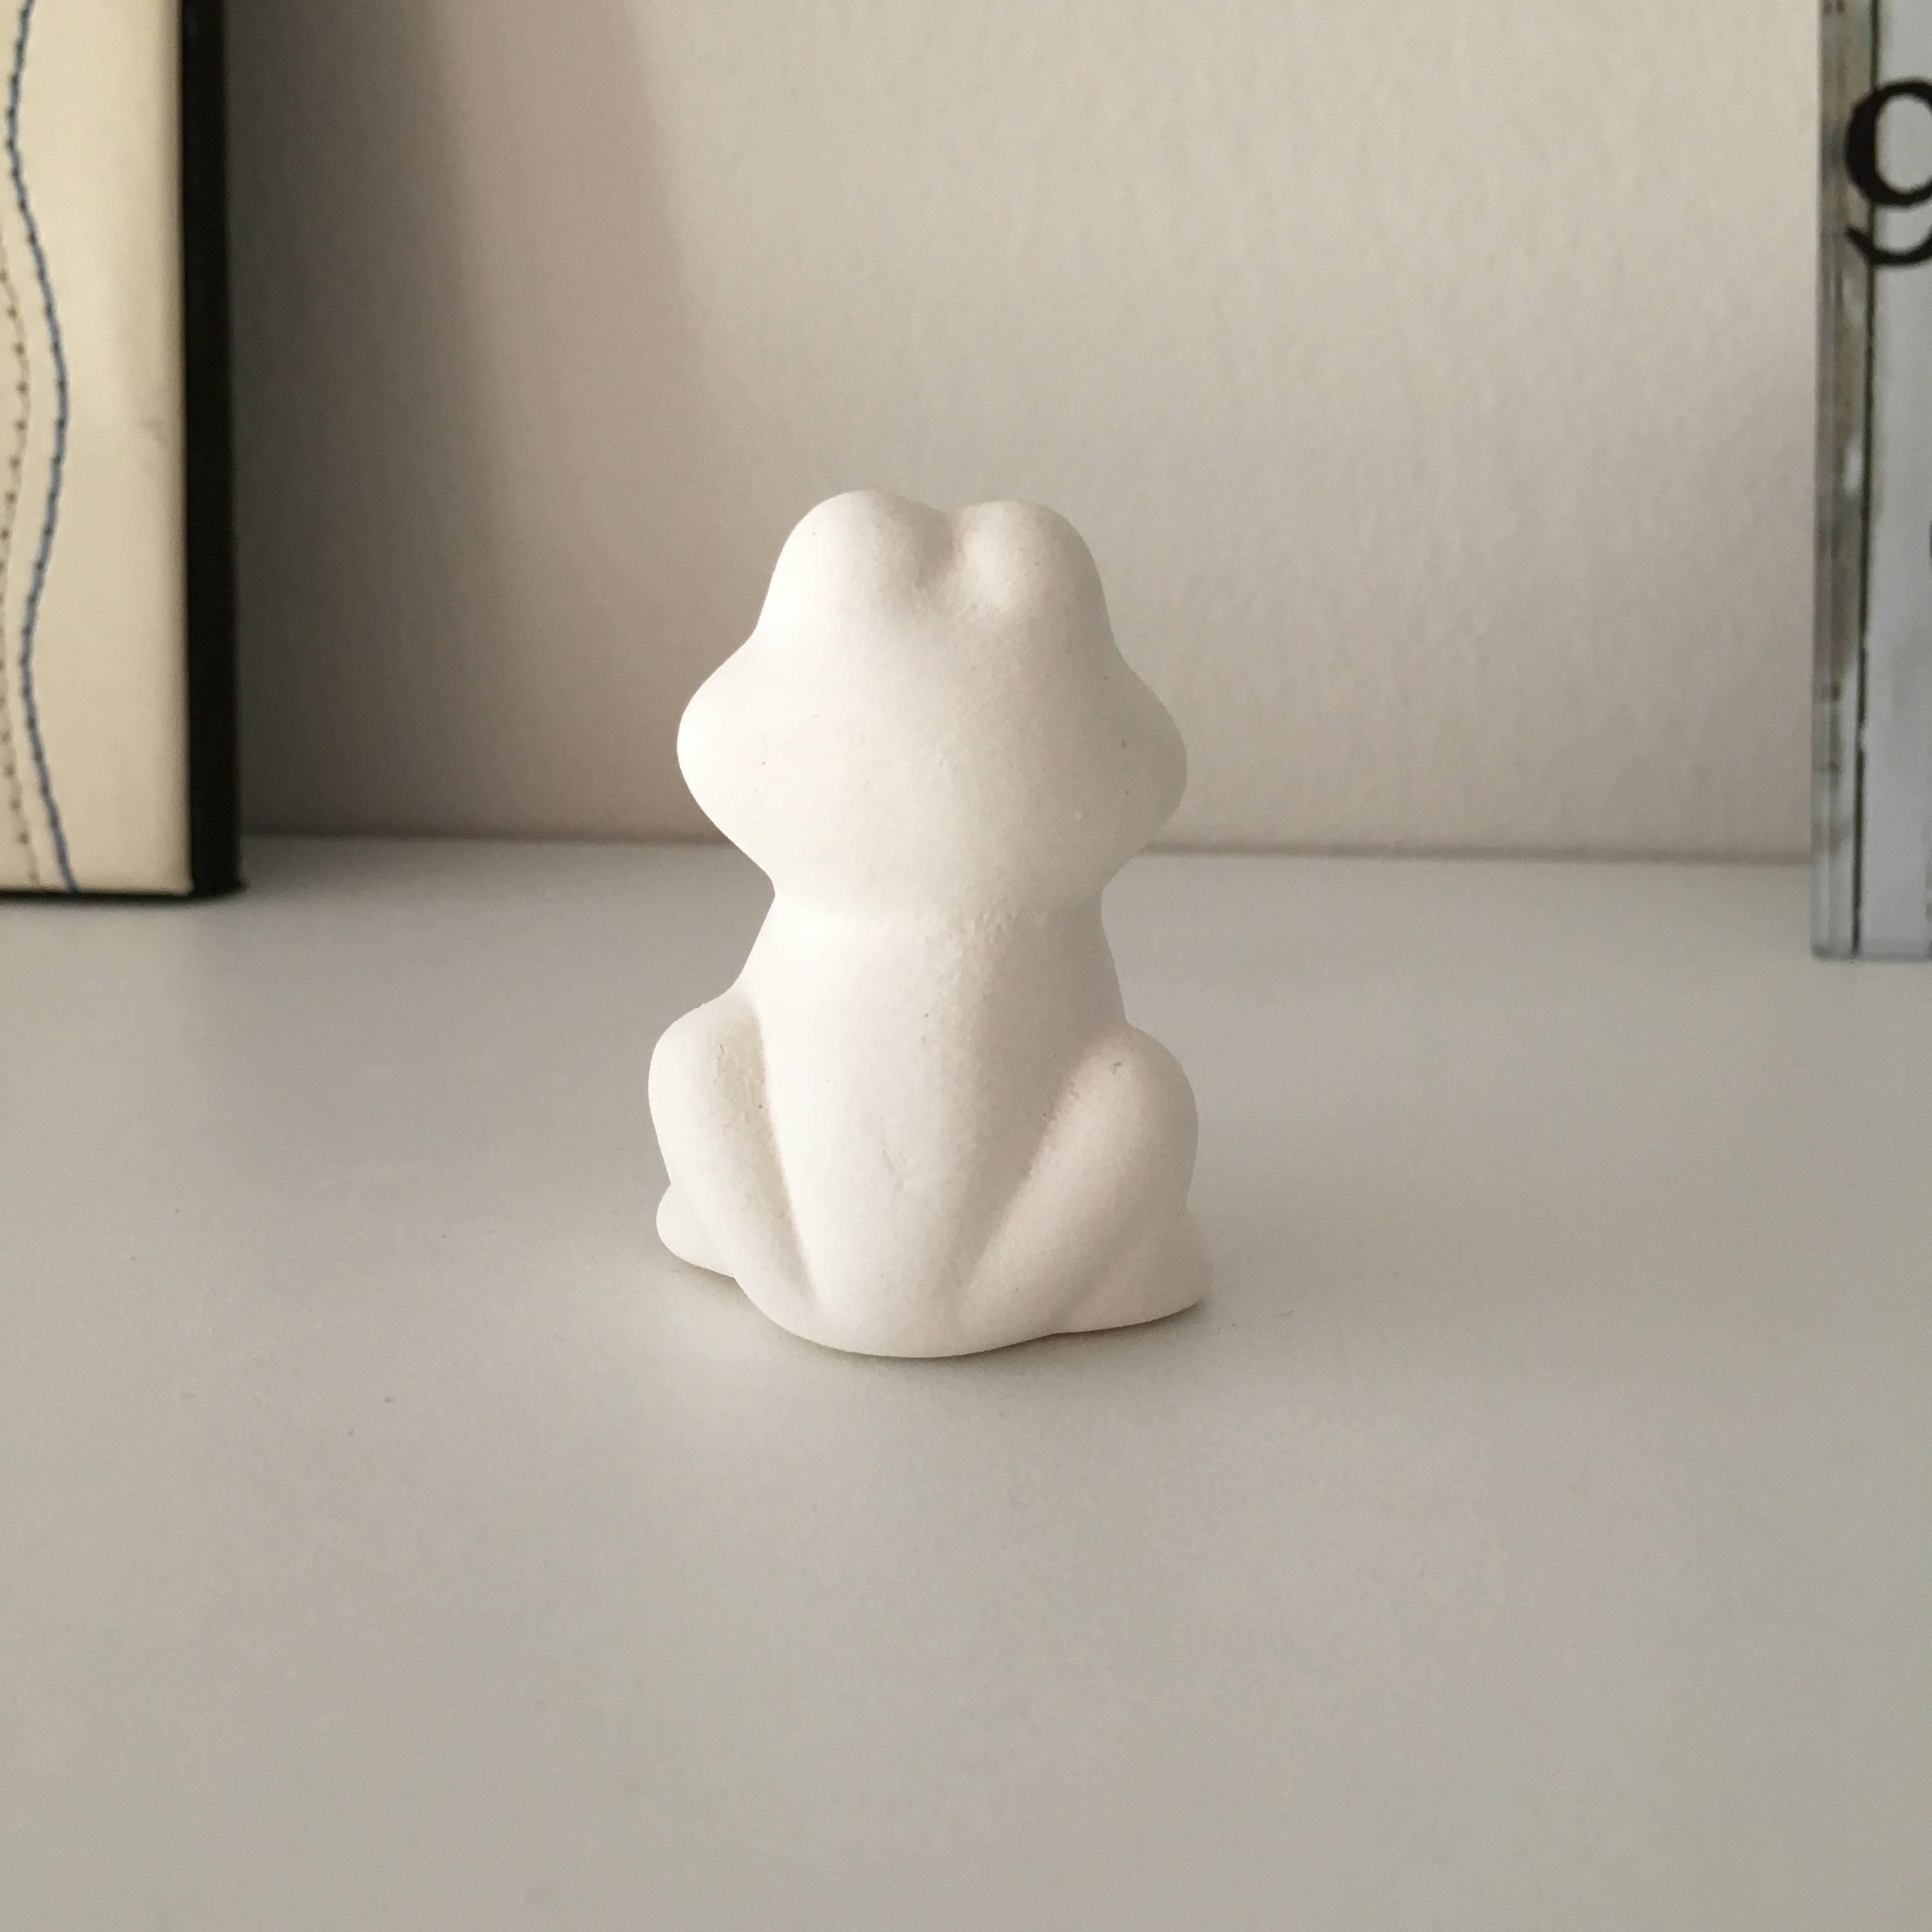 Ready to Paint Ceramic Bisque Unpainted Ceramic Polar Bear Figurine for Kids DIY Gift Set of 2 